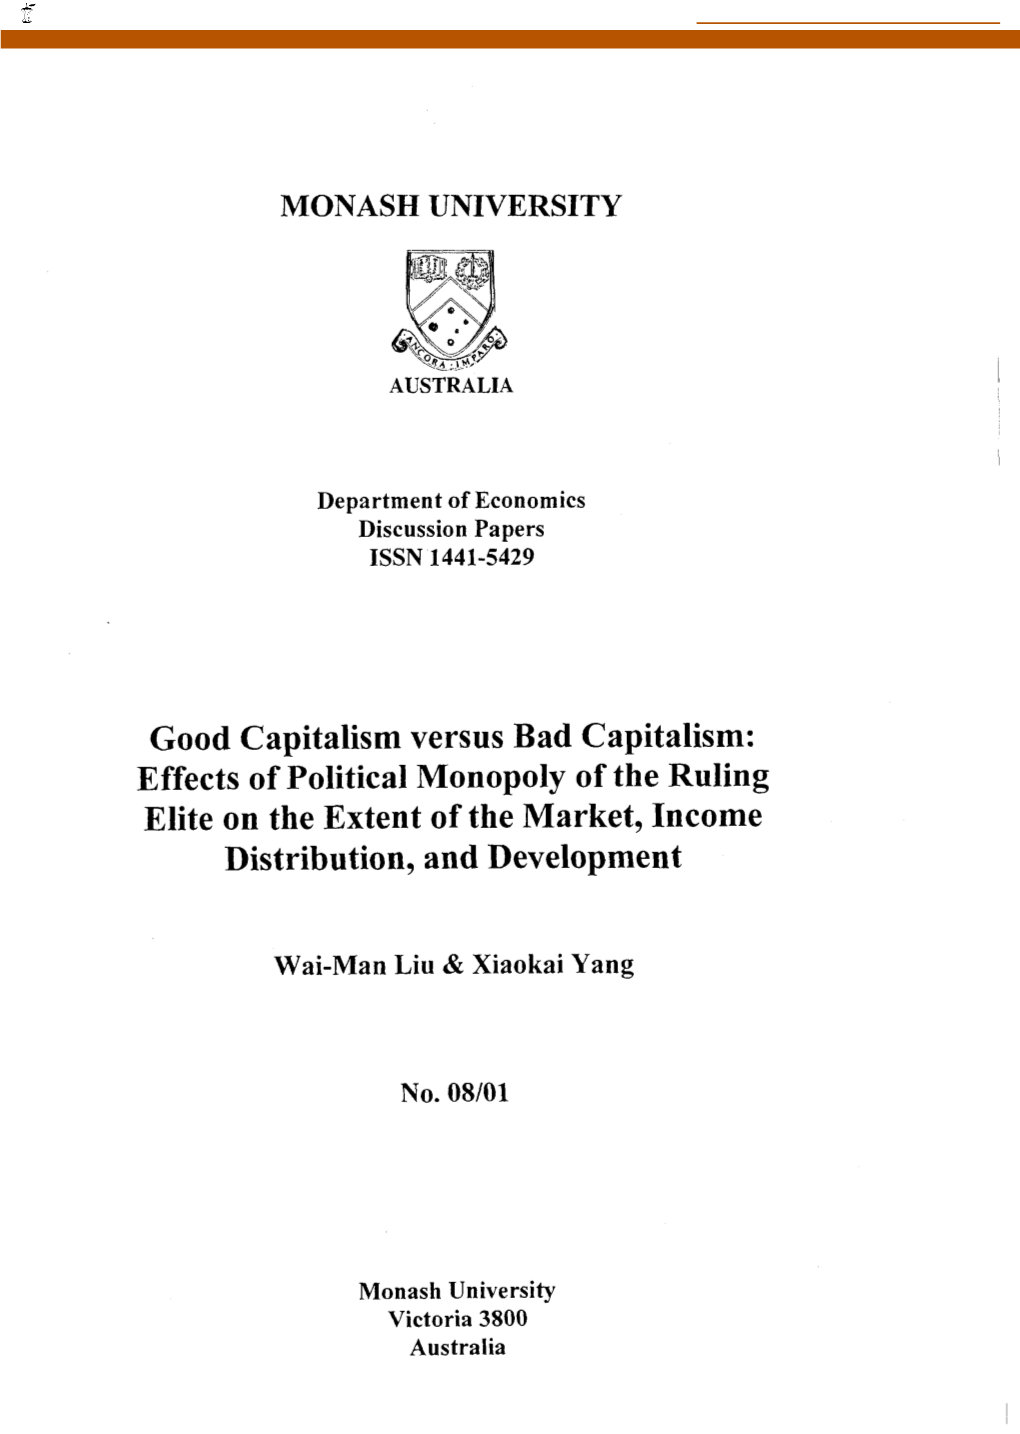 Effects of Political Monopoly of the Ruling Elite on the Extent of the Market, Income Distribution, and Development